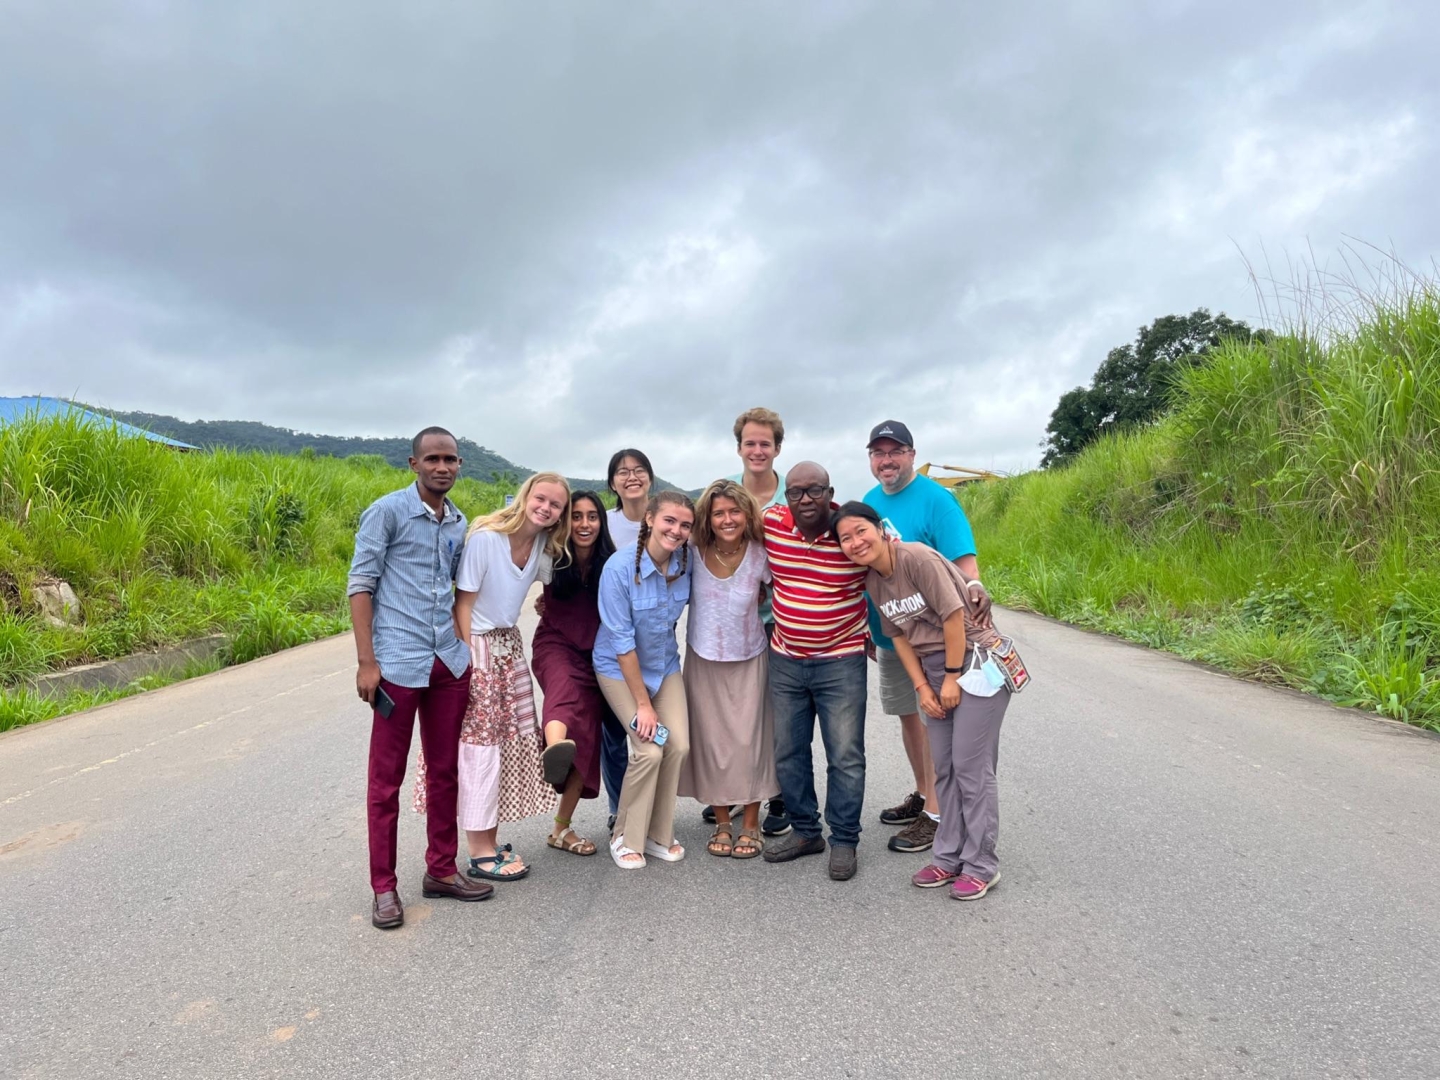 A group of people of various heights, skin tones, and ages pose with their arms around each other in the middle of a paved road that cuts through lush green hills.